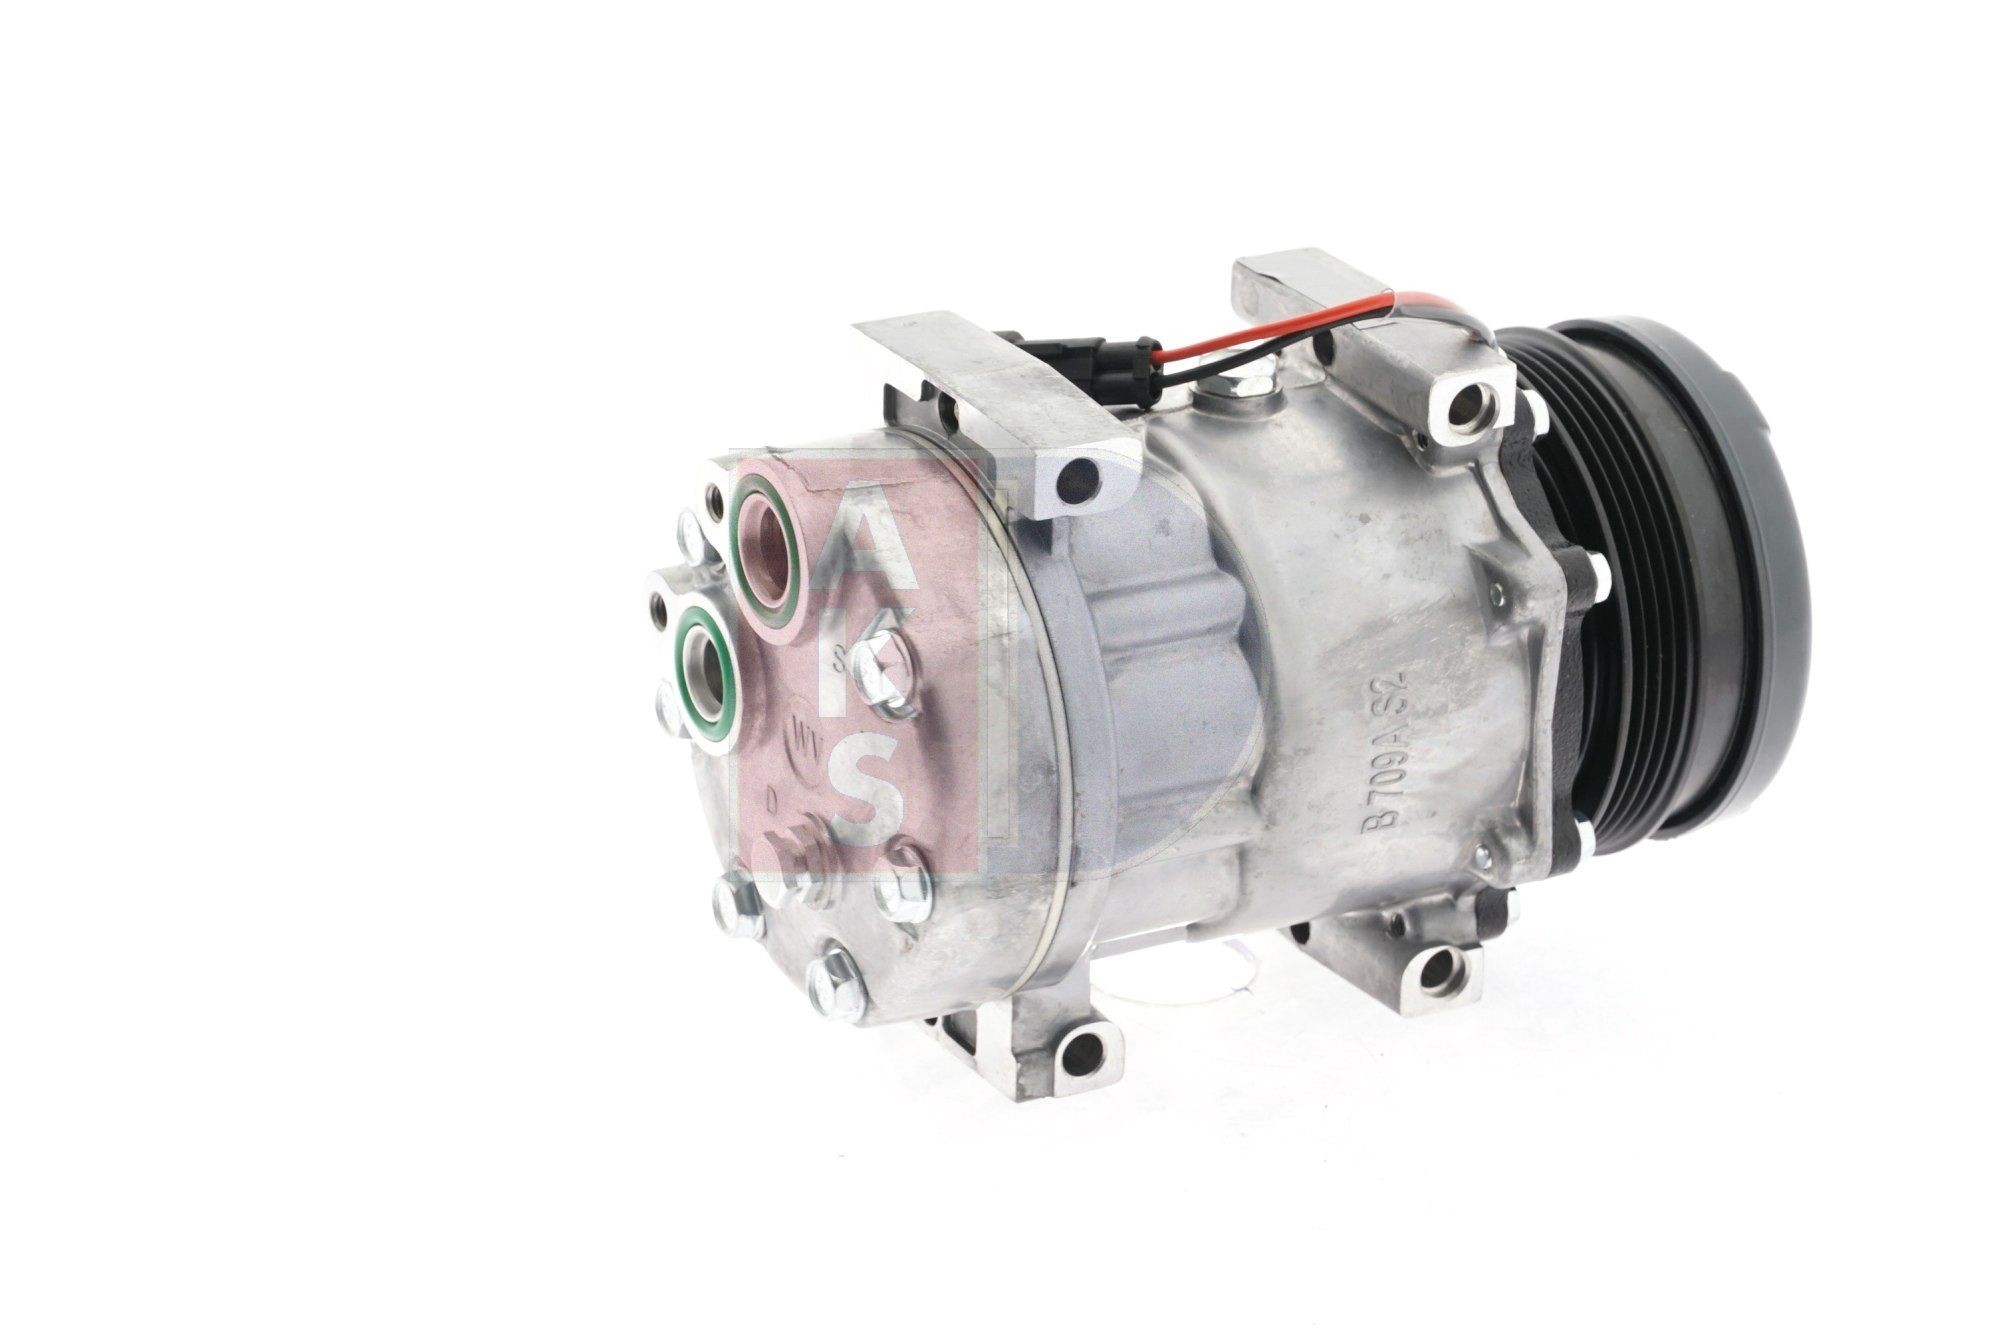 Air conditioning compressor 851786N from AKS DASIS